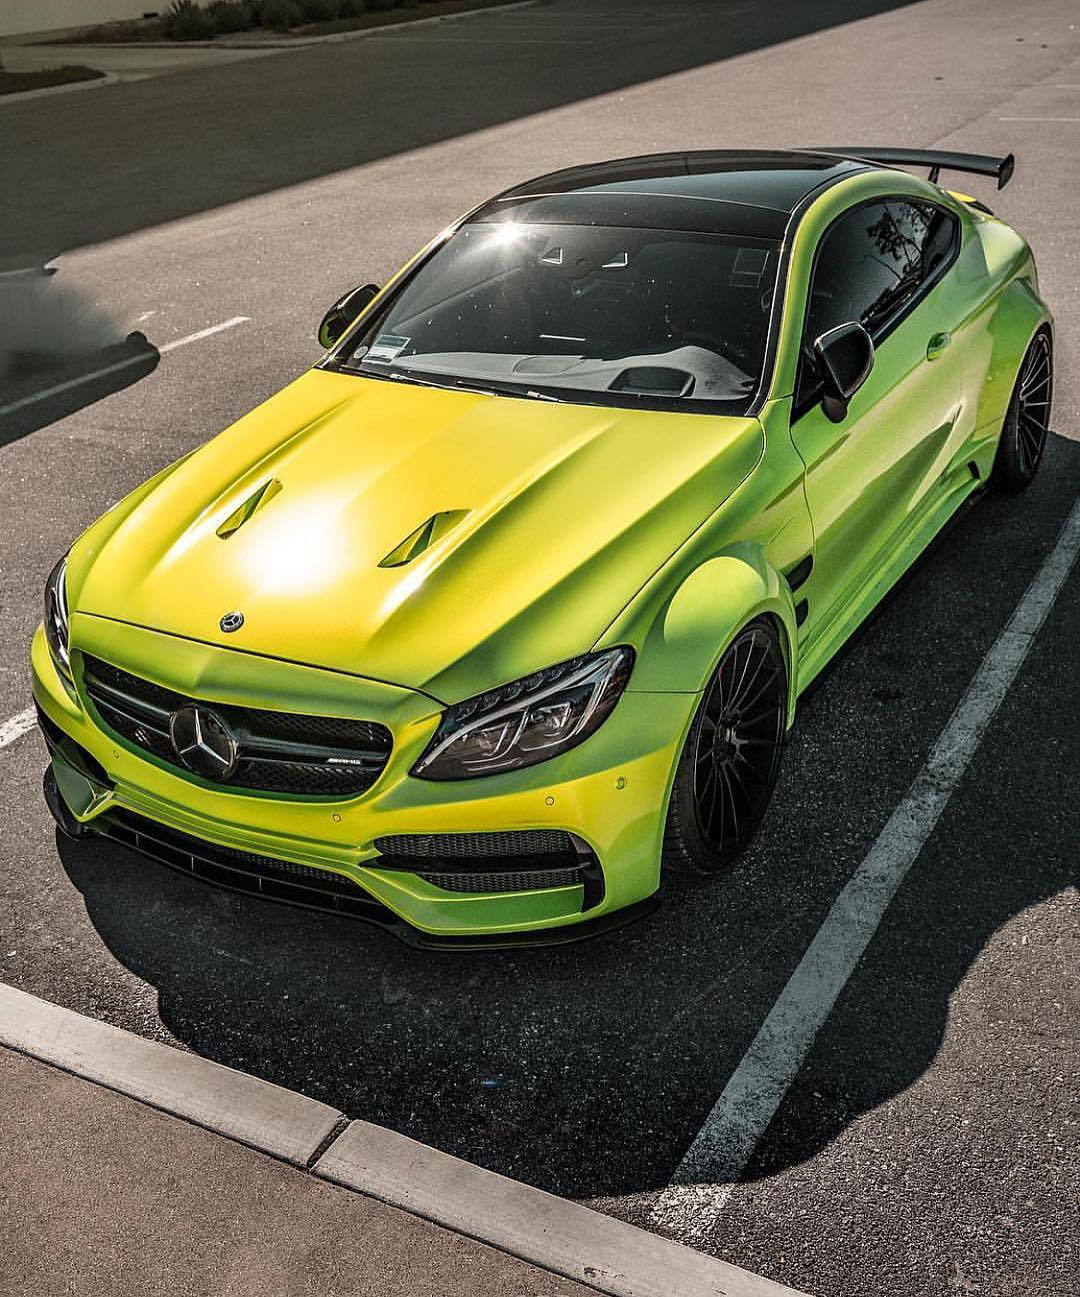 2018 Mercedes-Benz C63 AMG S - WIDEBODY C63S - 2K MILES - RDBLA WORK - Used - VIN 00000000000000000 - 2,000 Miles - 8 cyl - 2WD - Automatic - Coupe - Los Angeles, CA 90210, United States